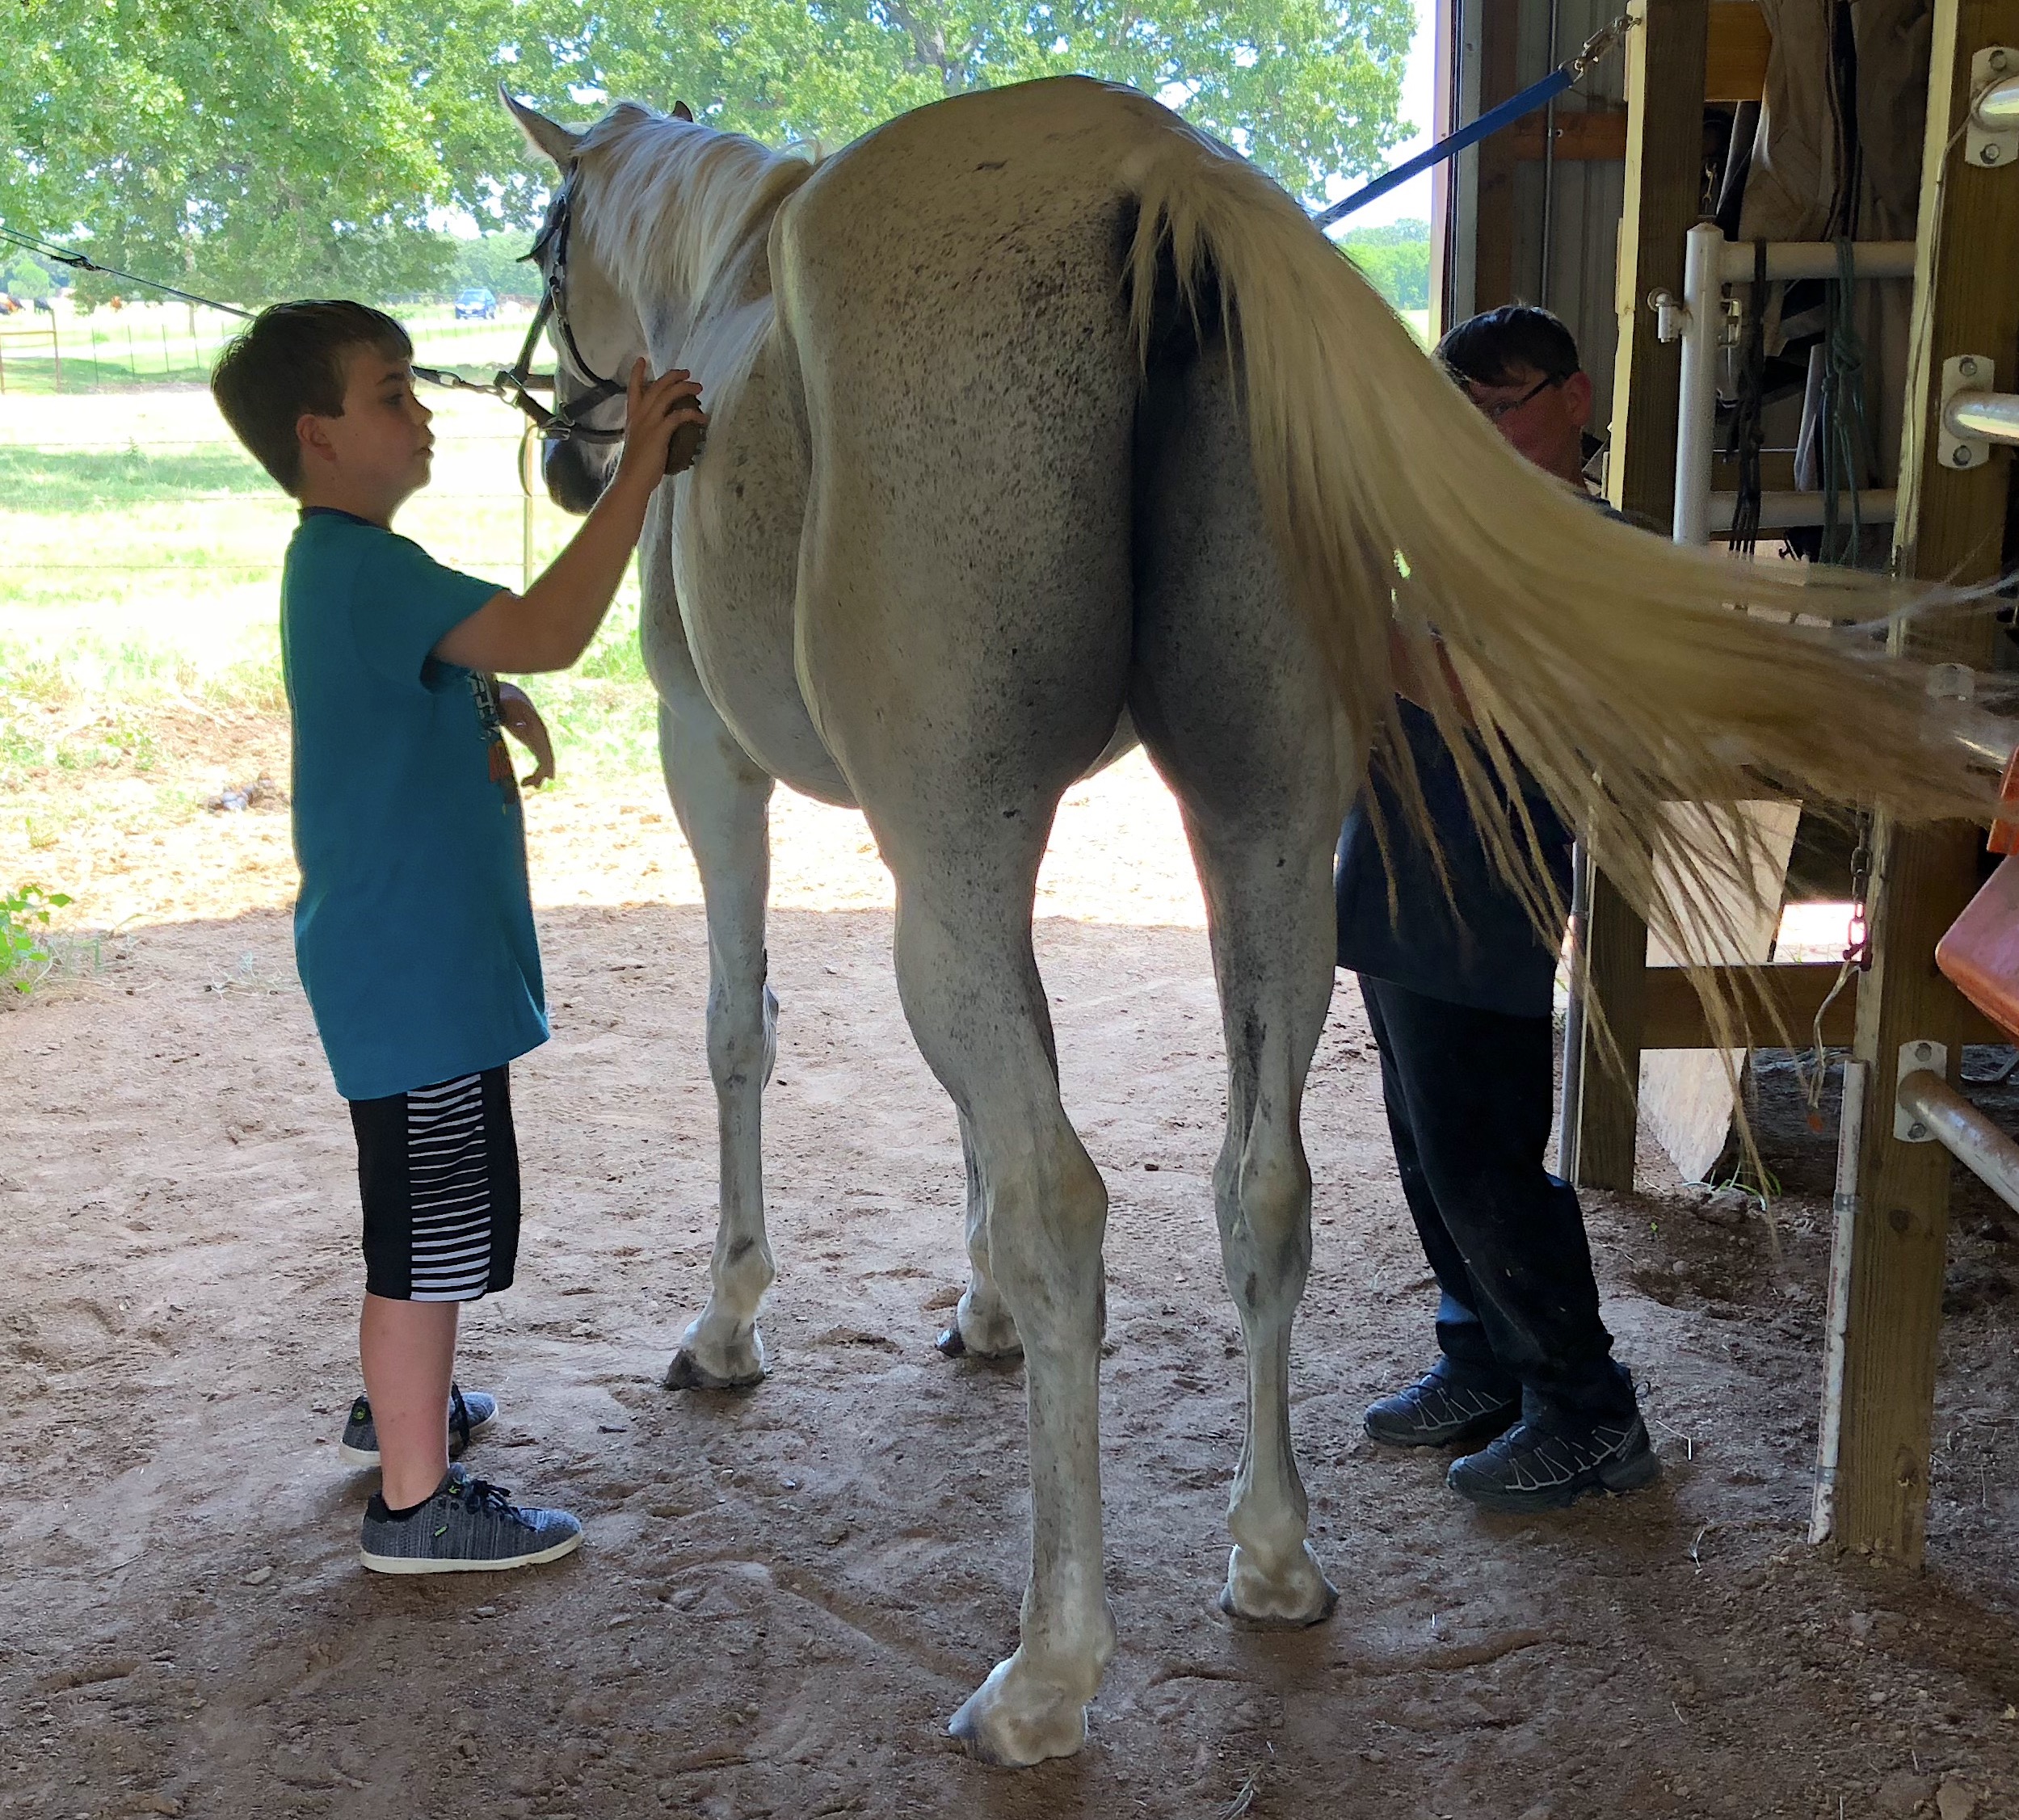 Lake Fork Stables Announces New Non-Profit Horseback Riding Program with Retired Racehorses for Youth of Wood, Hopkins and Rains Counties